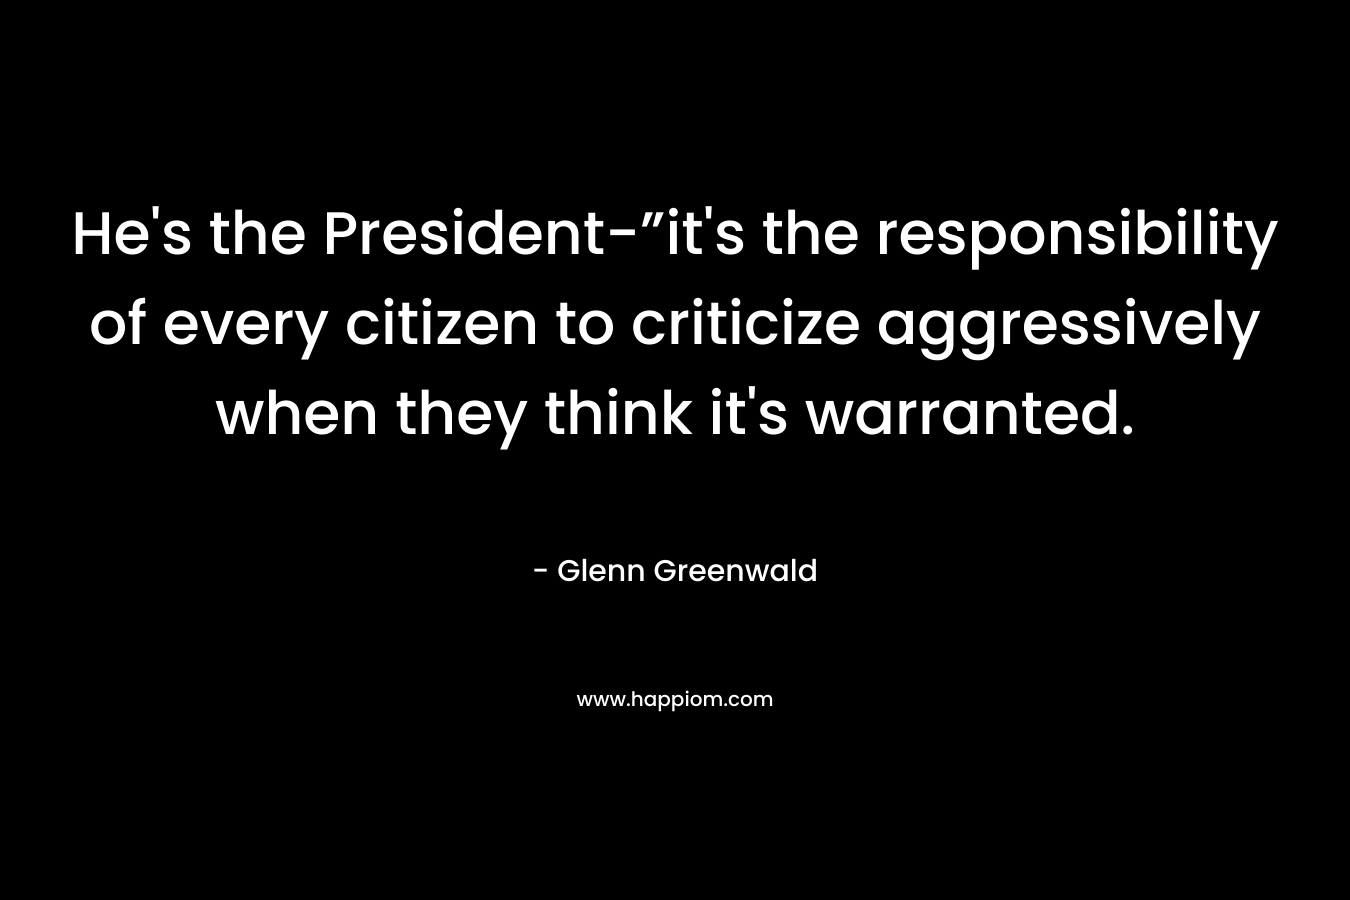 He's the President-”it's the responsibility of every citizen to criticize aggressively when they think it's warranted.